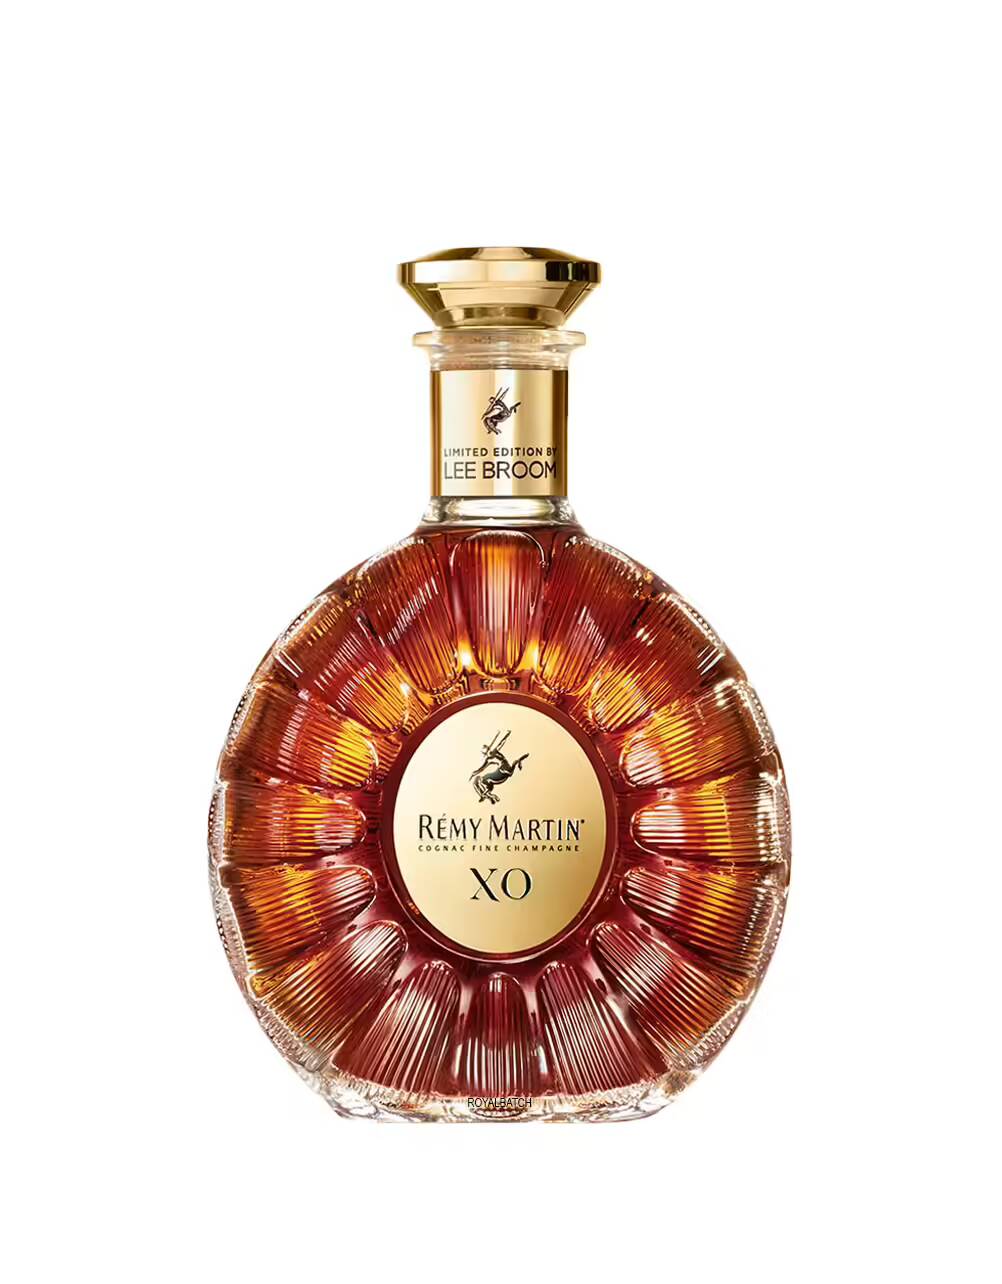 Remy Martin XO x Lee Broom Limited Edition Cognac